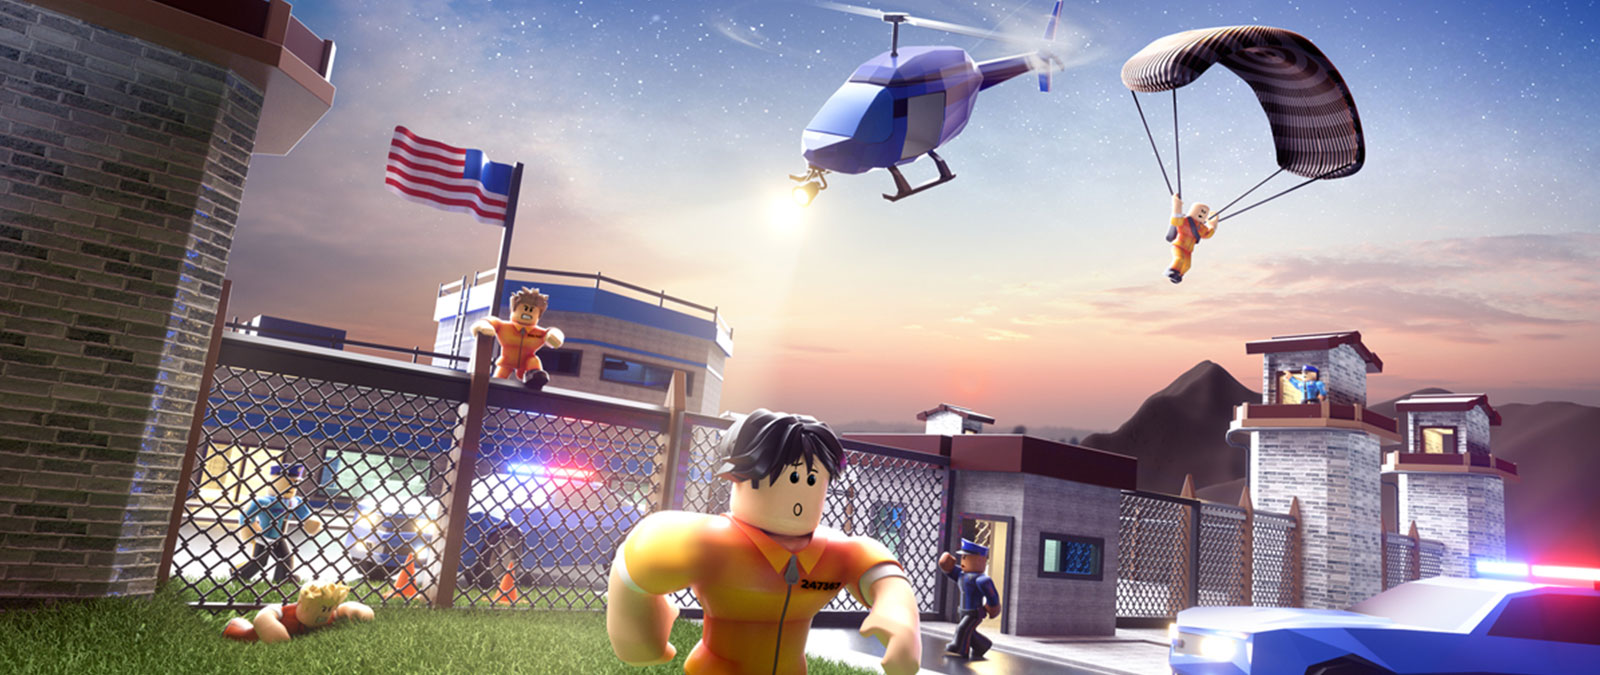 Roblox characters escaping from prison while police chase after them in Jailbreak game